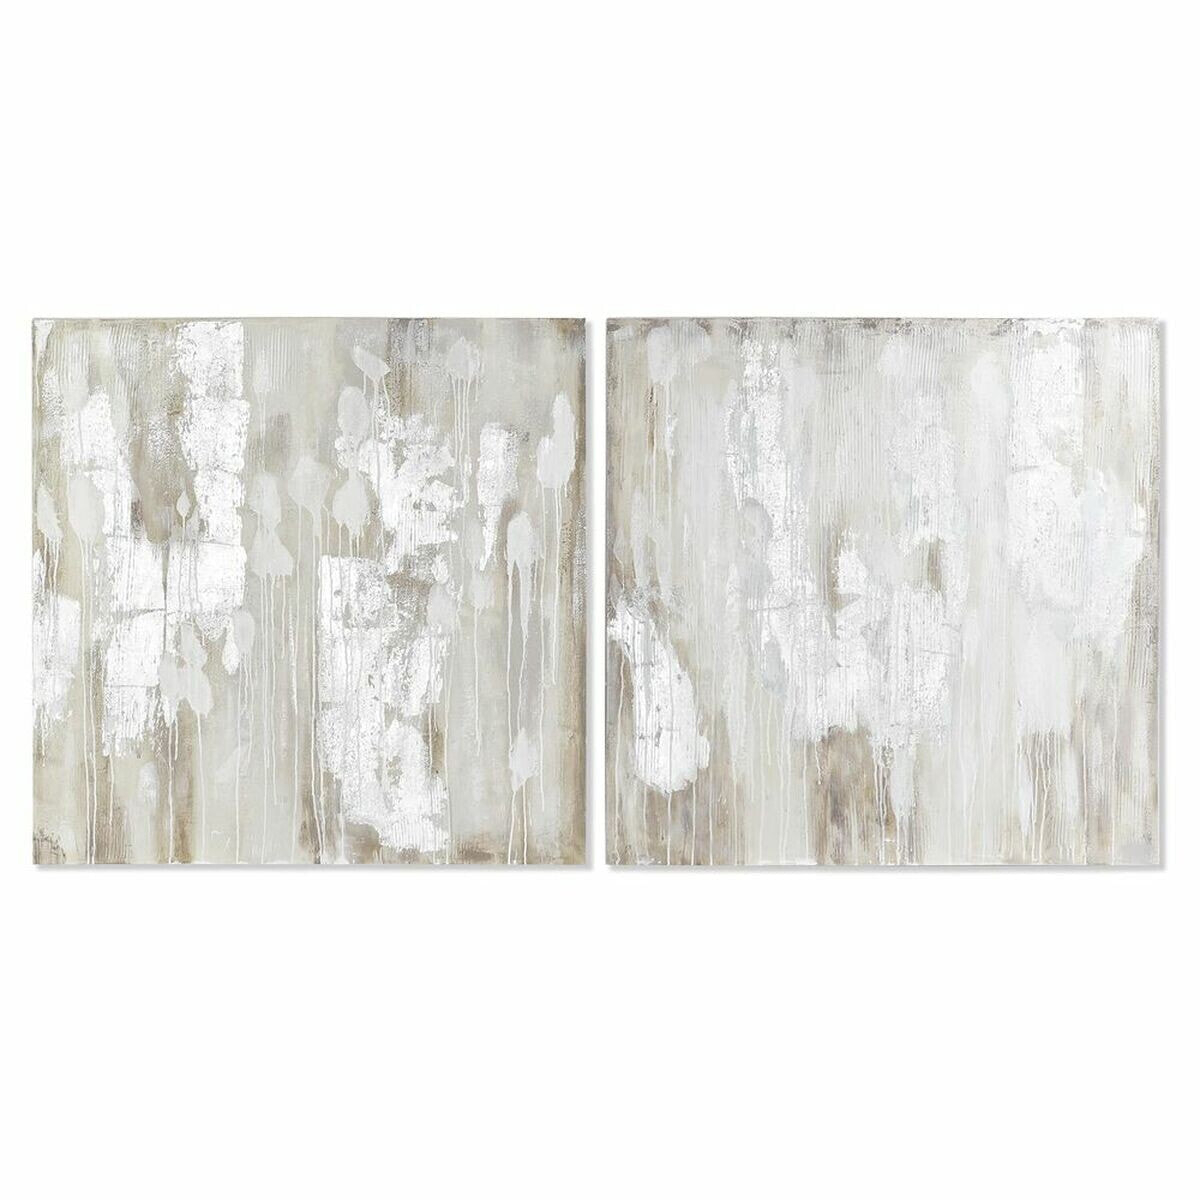 Painting DKD Home Decor 100 x 3,7 x 100 cm Abstract Modern (2 Units)